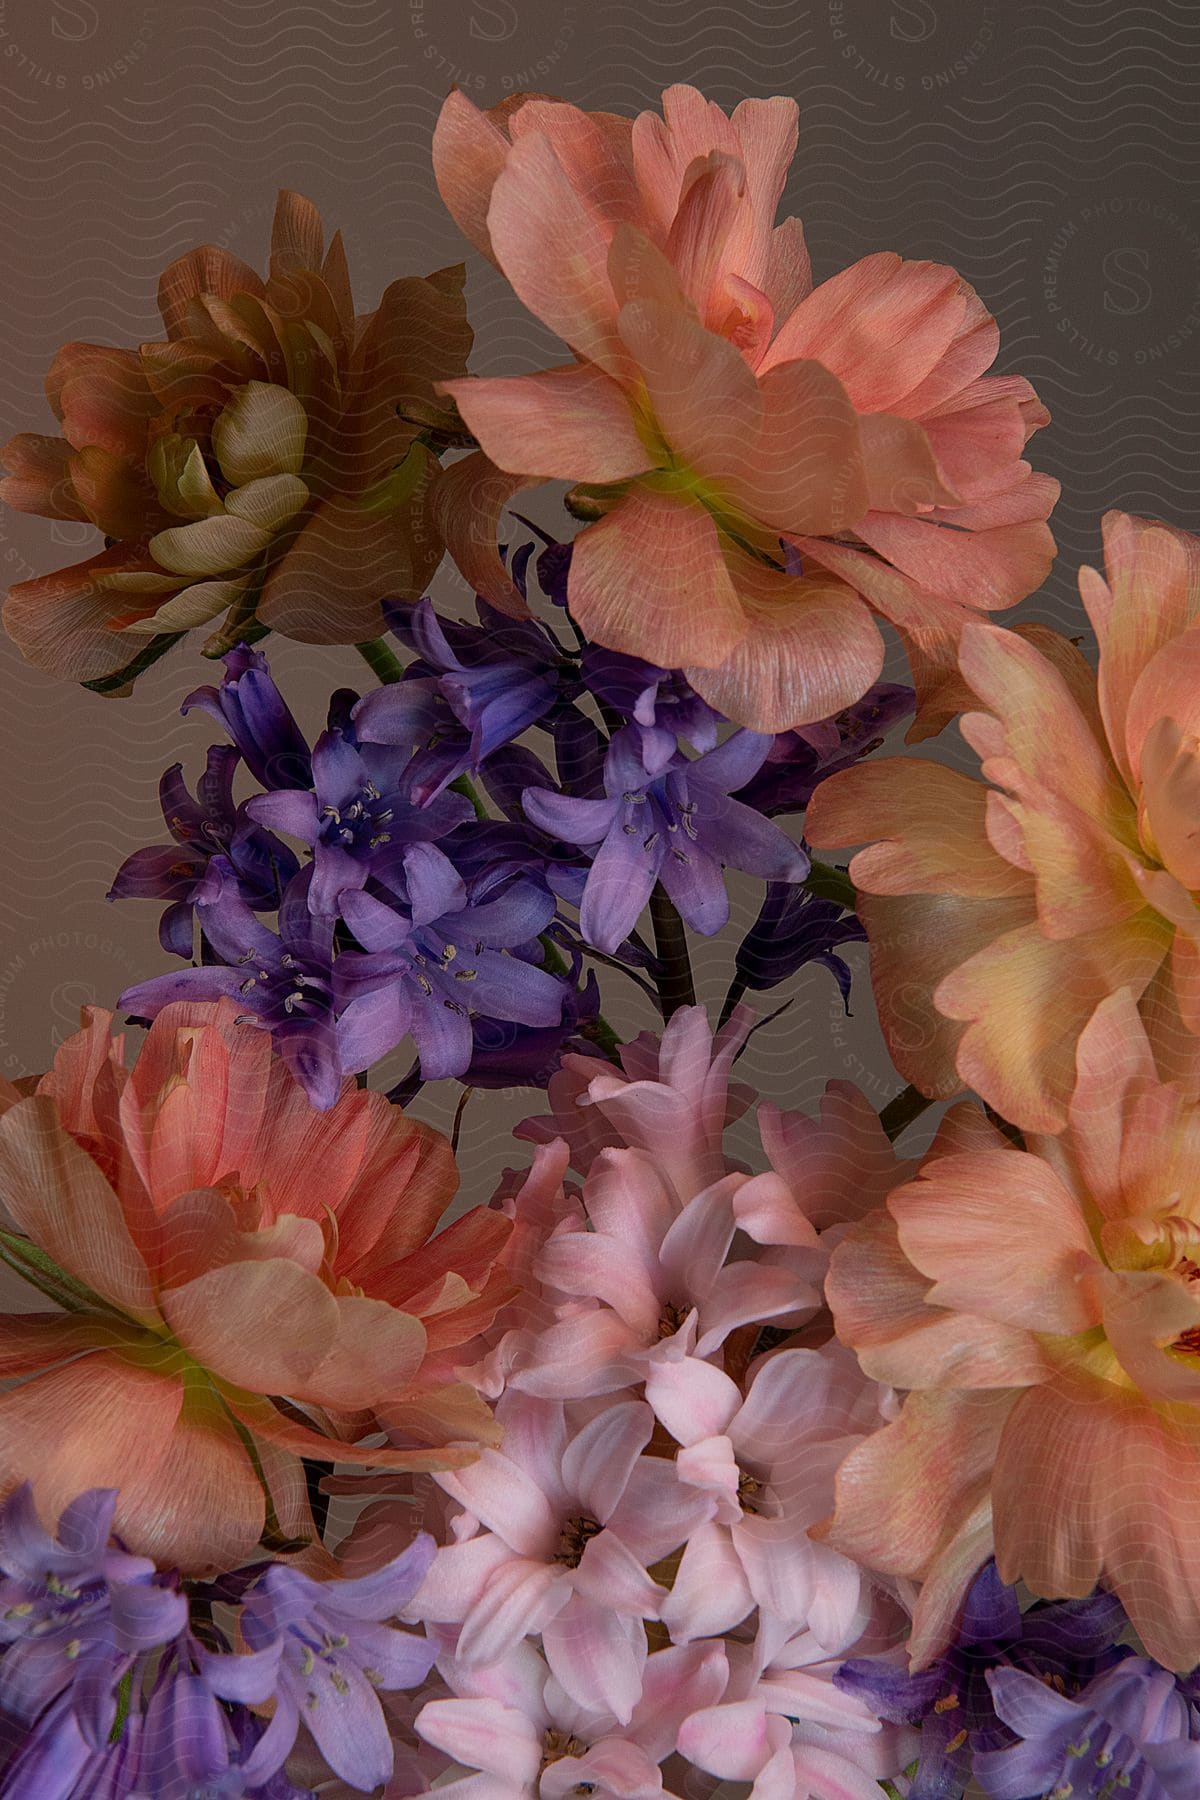 A bouquet of light orange, pink and purple flowers.